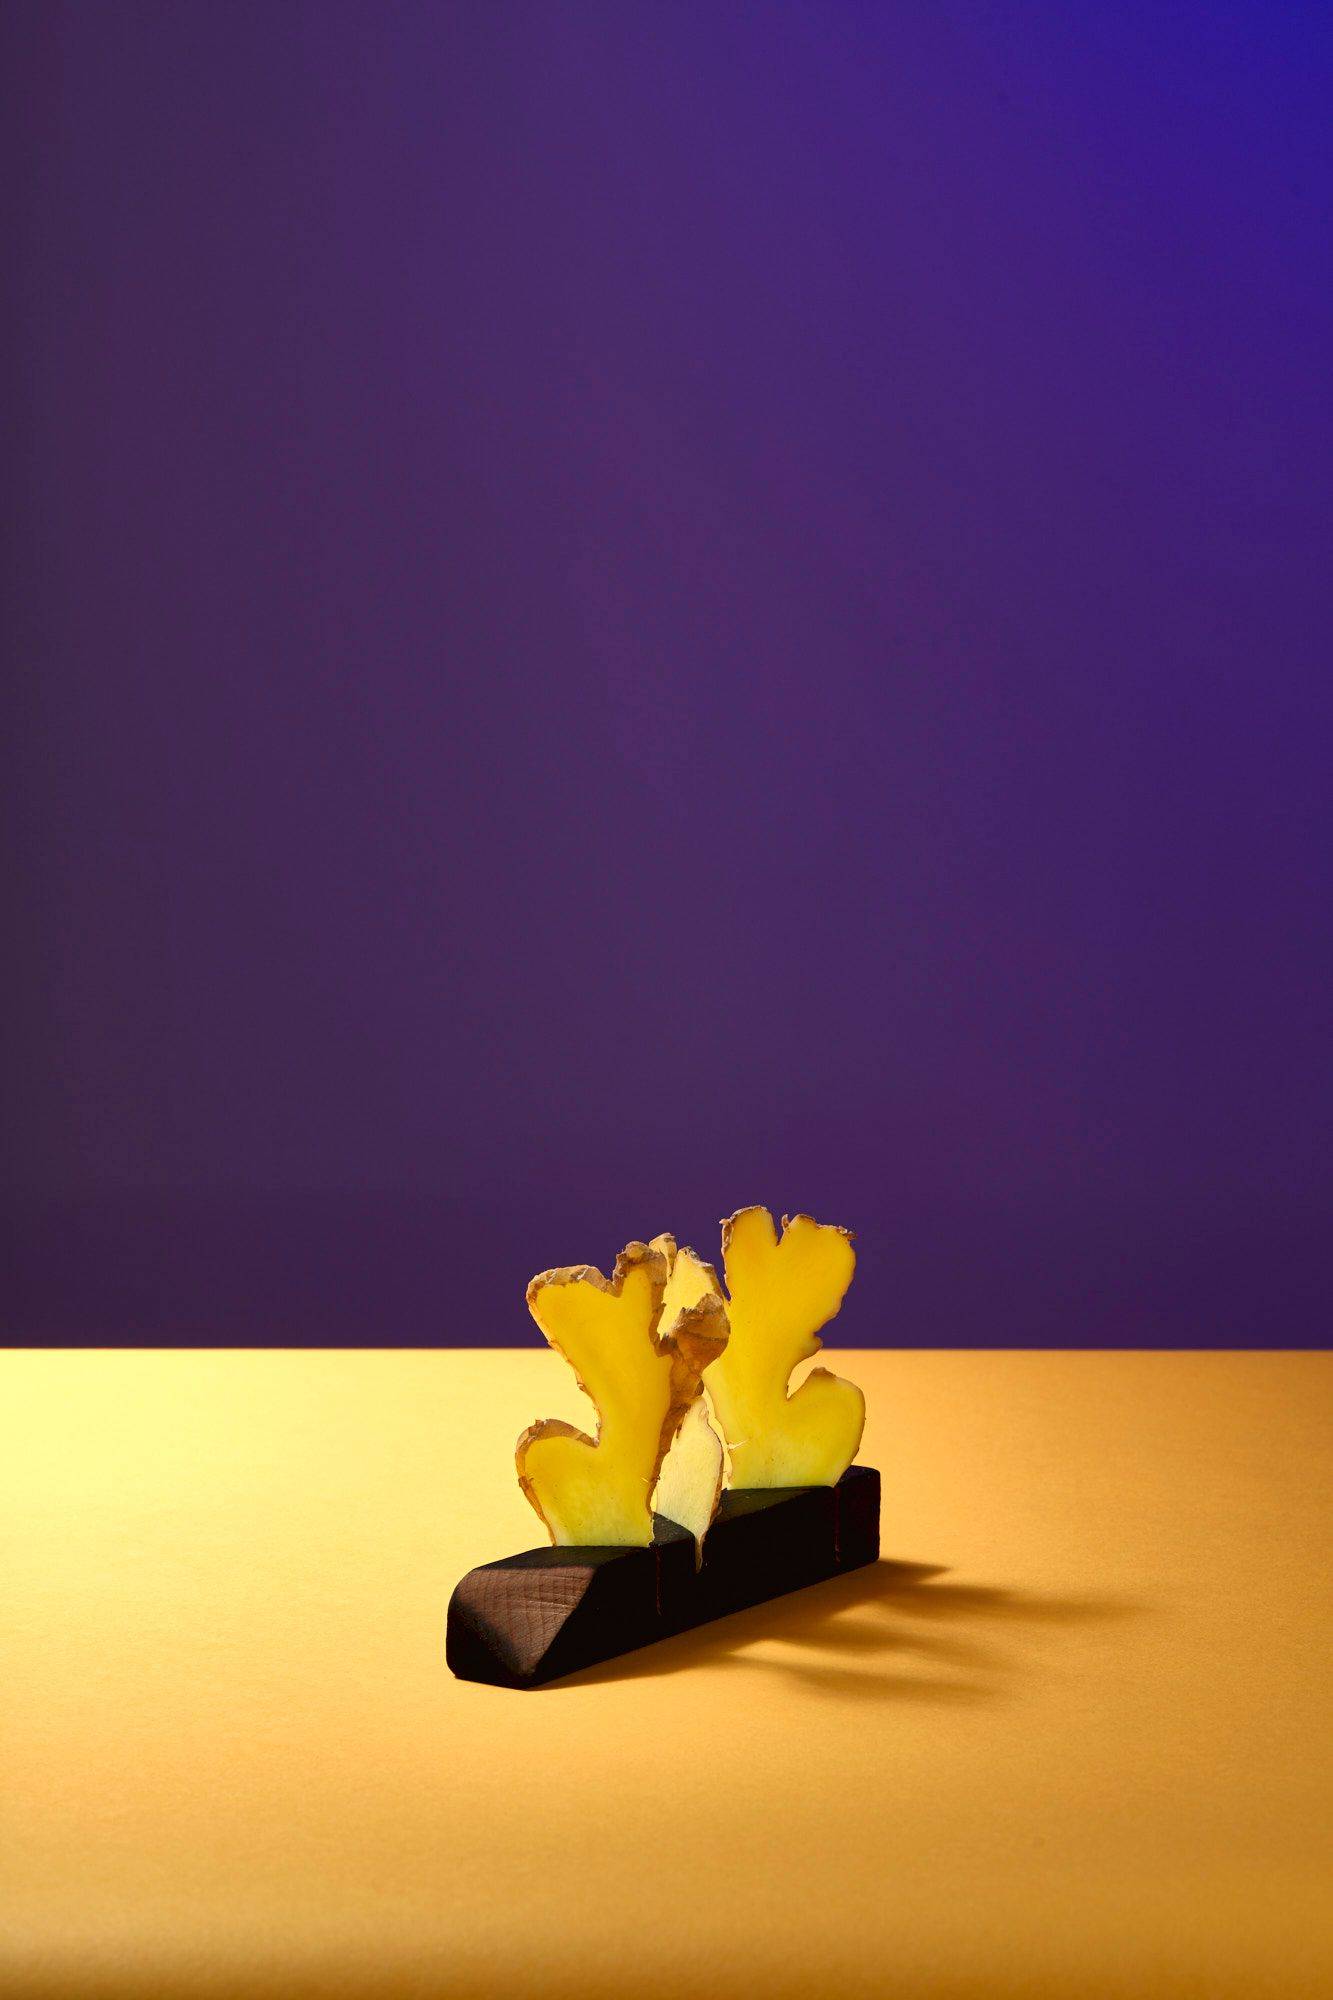 three slices of ginger on a wooden stand with yellow and purple background